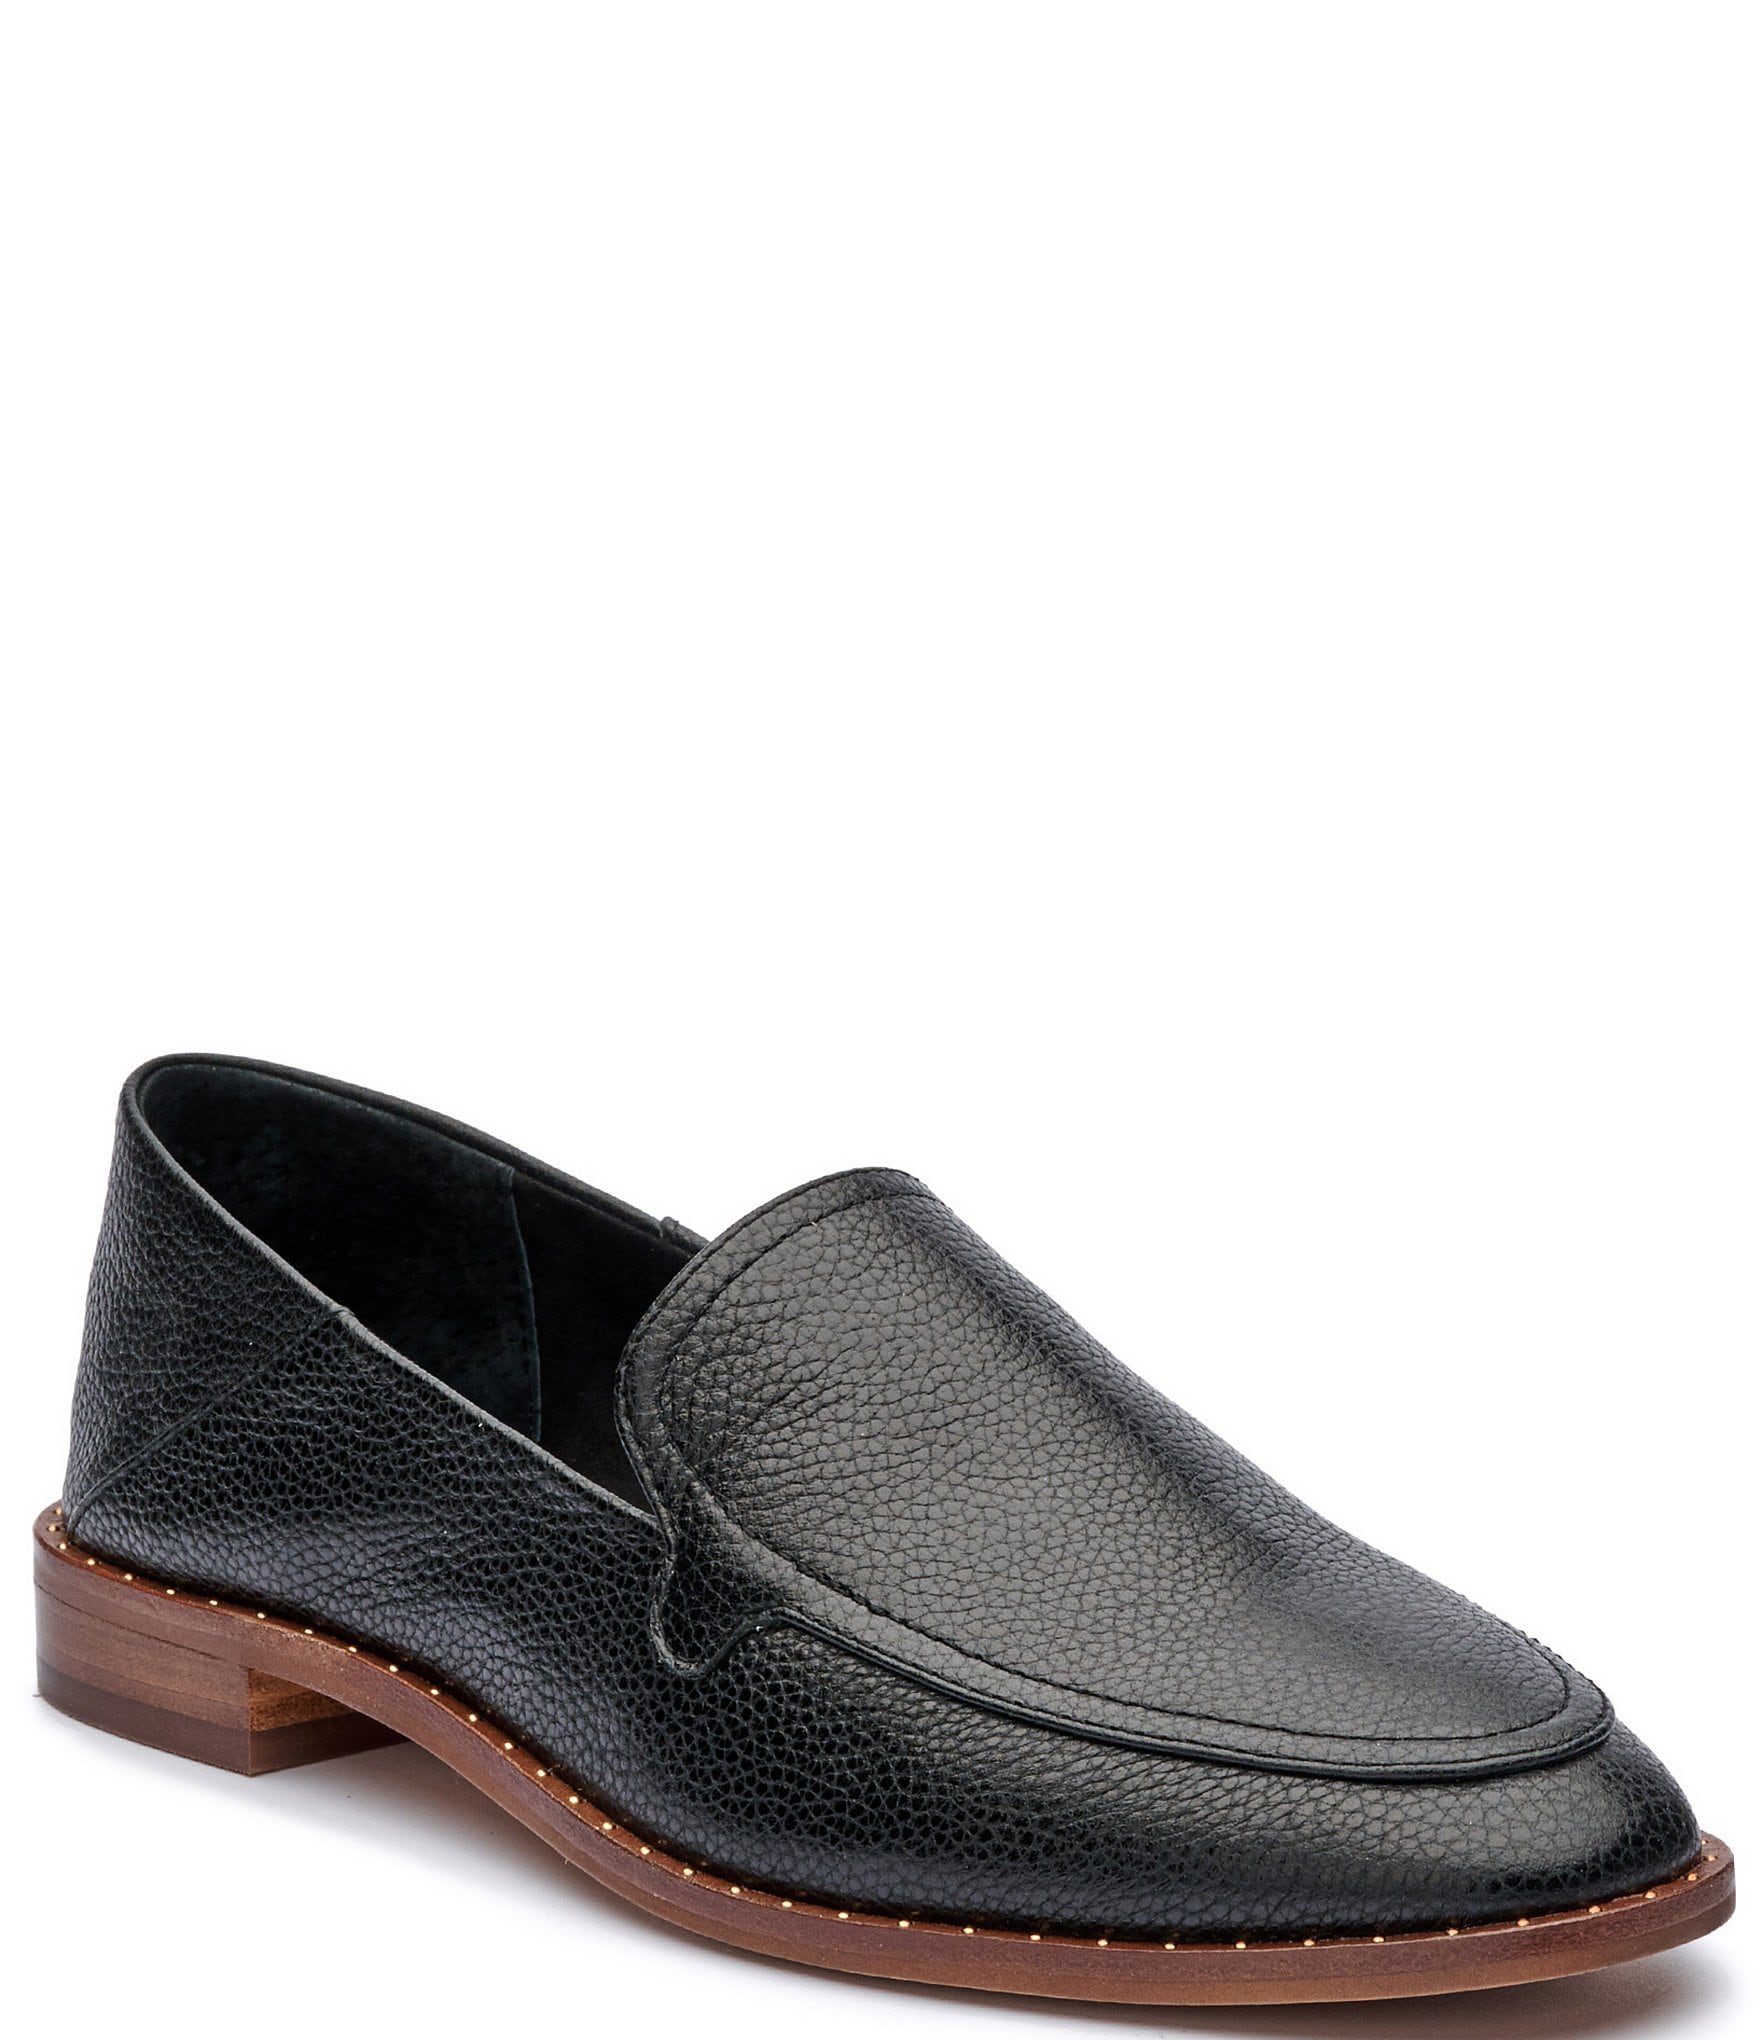 Vince Camuto Cretinian Leather Loafers | Dillard's